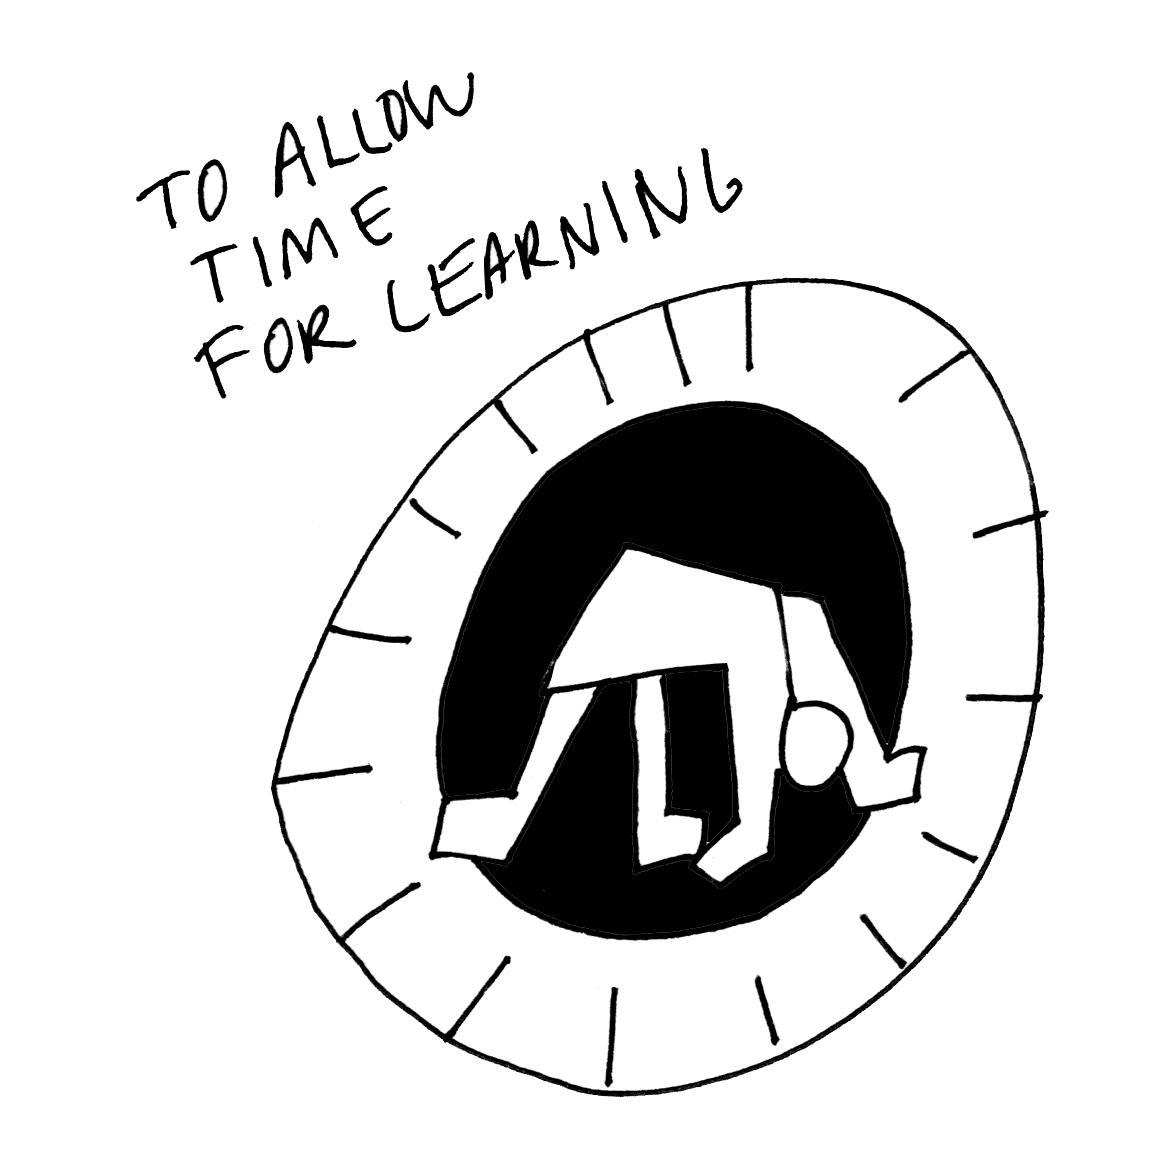 21 to allow time for learning-c.jpg